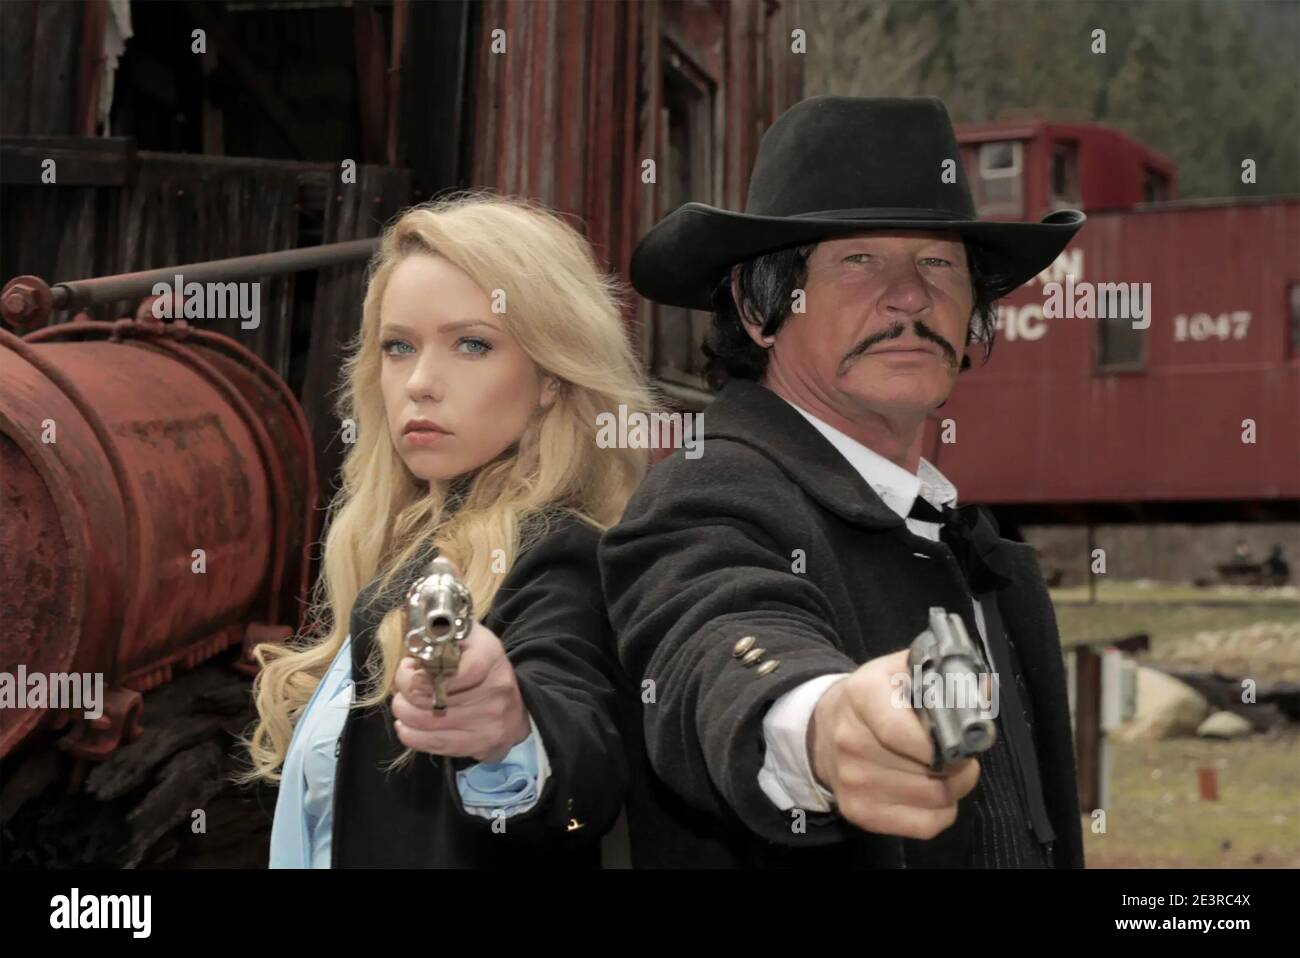 ONCE UPON A TIME IN DEADWOOD 2018 Uncork'd Entertainment film with Charles Coburn and Karin Brauns Stock Photo